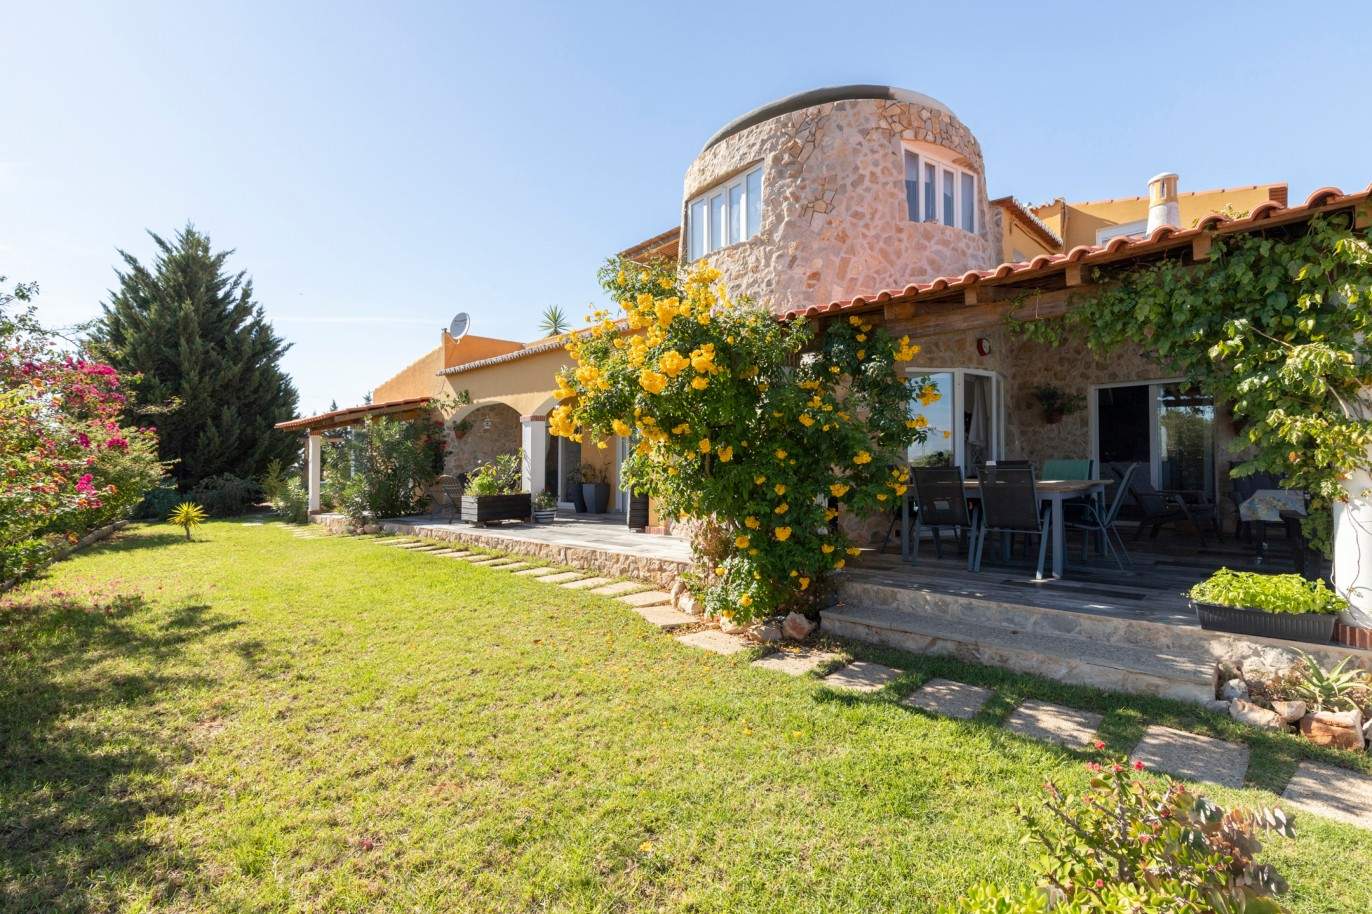 6 Bedrooms detached villa with swimming pool, for sale in Caramujeira, Algarve_209986